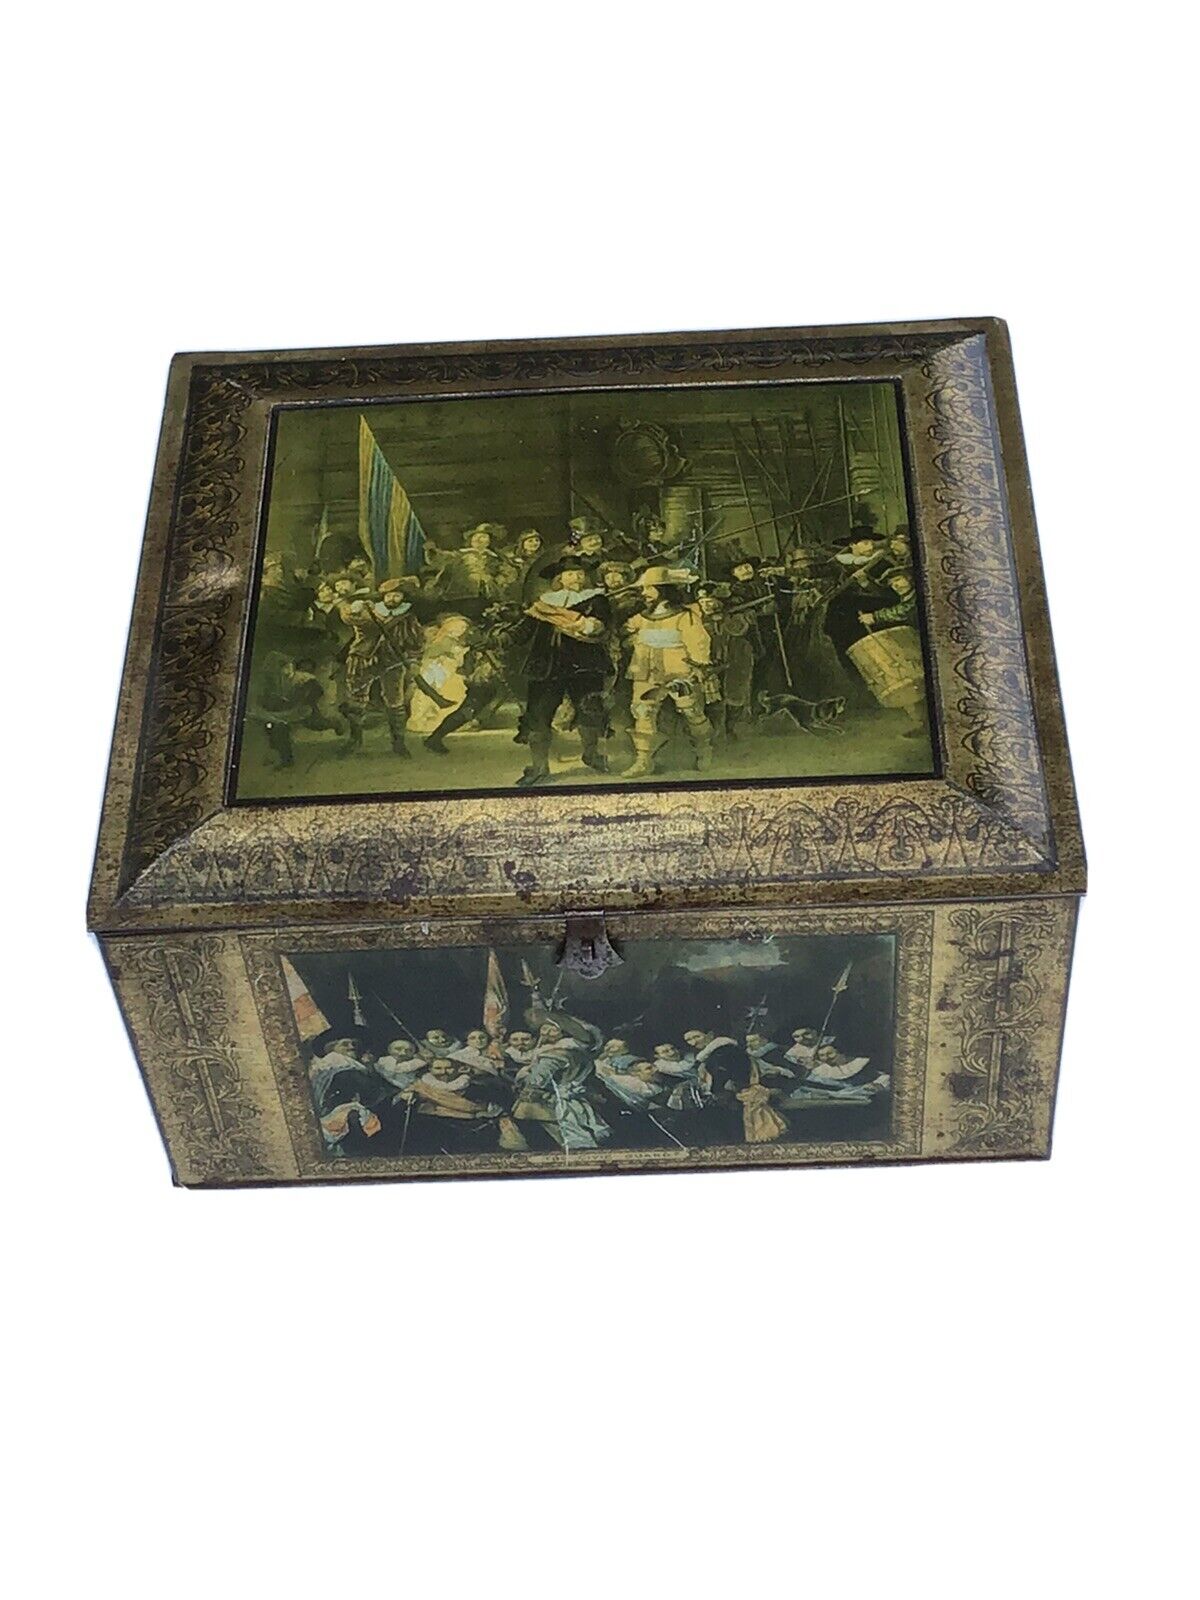 Rare Early 1900s Beech-Nut Rembrandt Tin